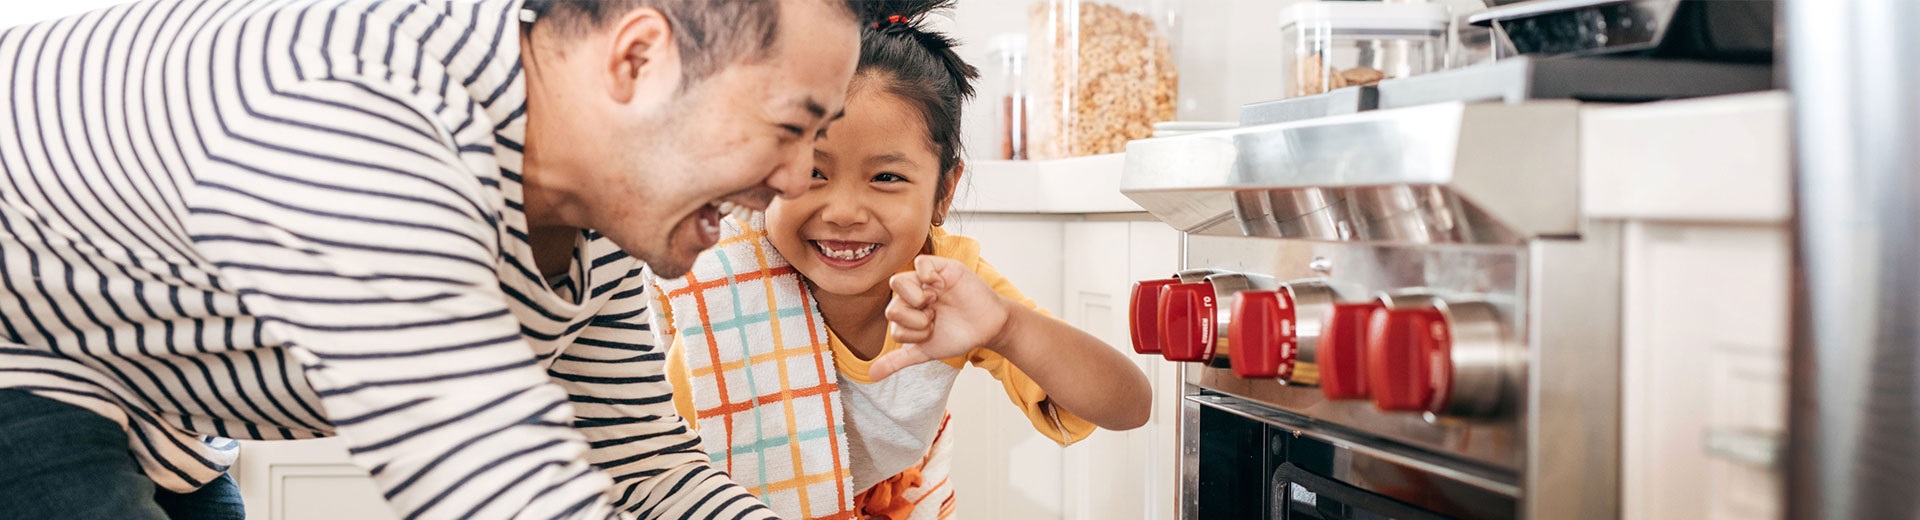 Dad and daughter smiling in the kitchen